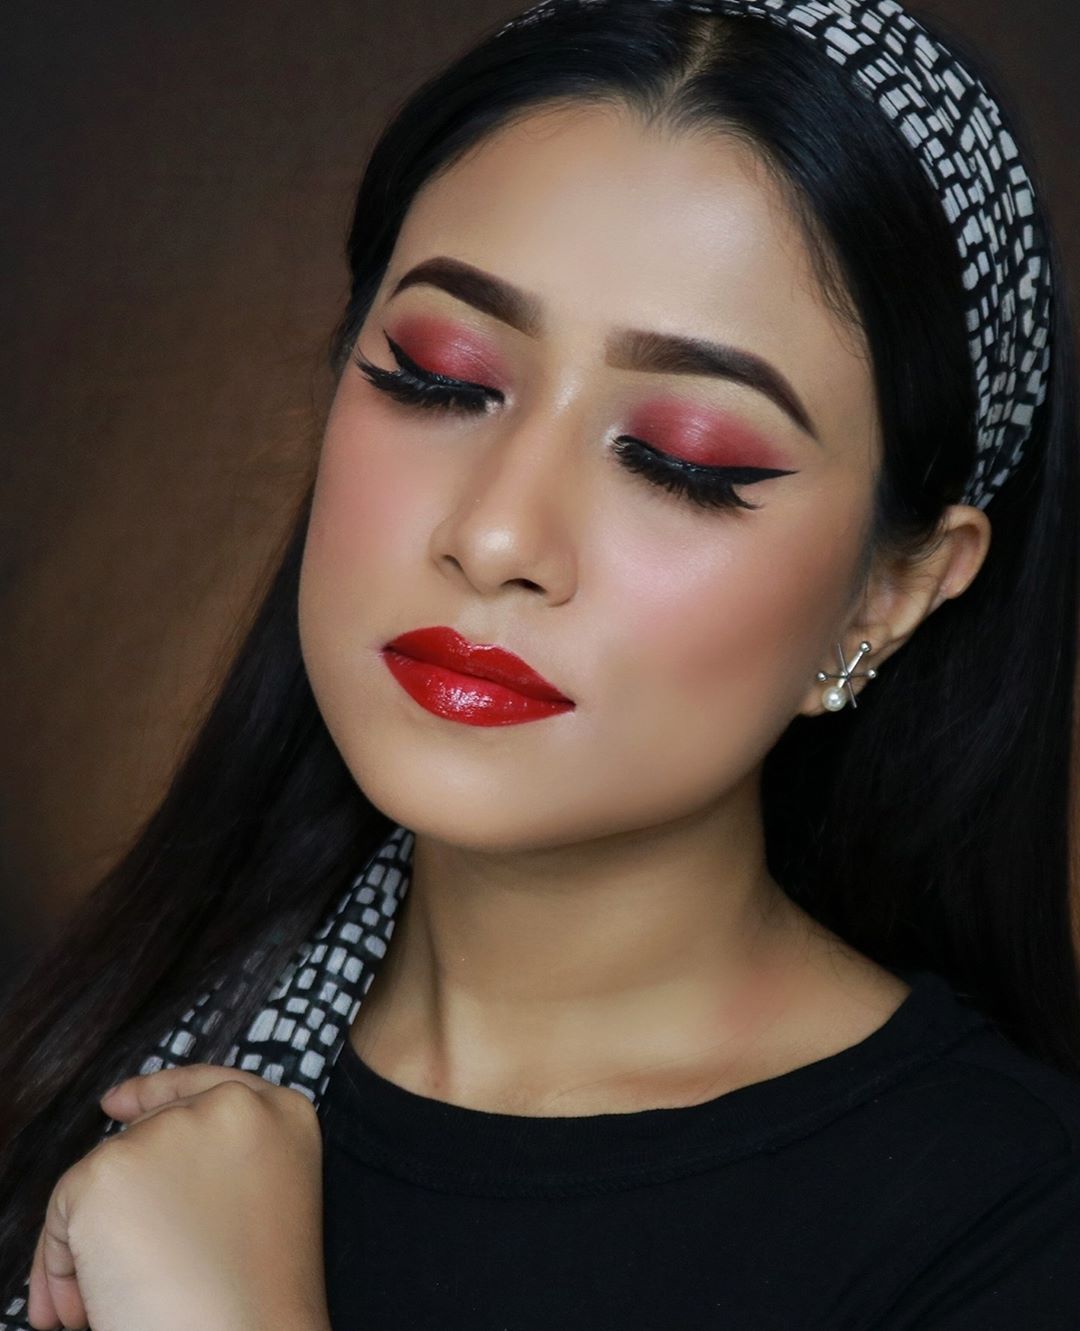 SUGAR Cosmetics - Red never goes out of style! ⁠
⁠
Colour fest is here! Visit our website to grab exciting offers on your favourite reds now. ⁠
In frame: @barshapatra_17⁠
⁠
Products used: ⁠
🌸 Grand Fi...